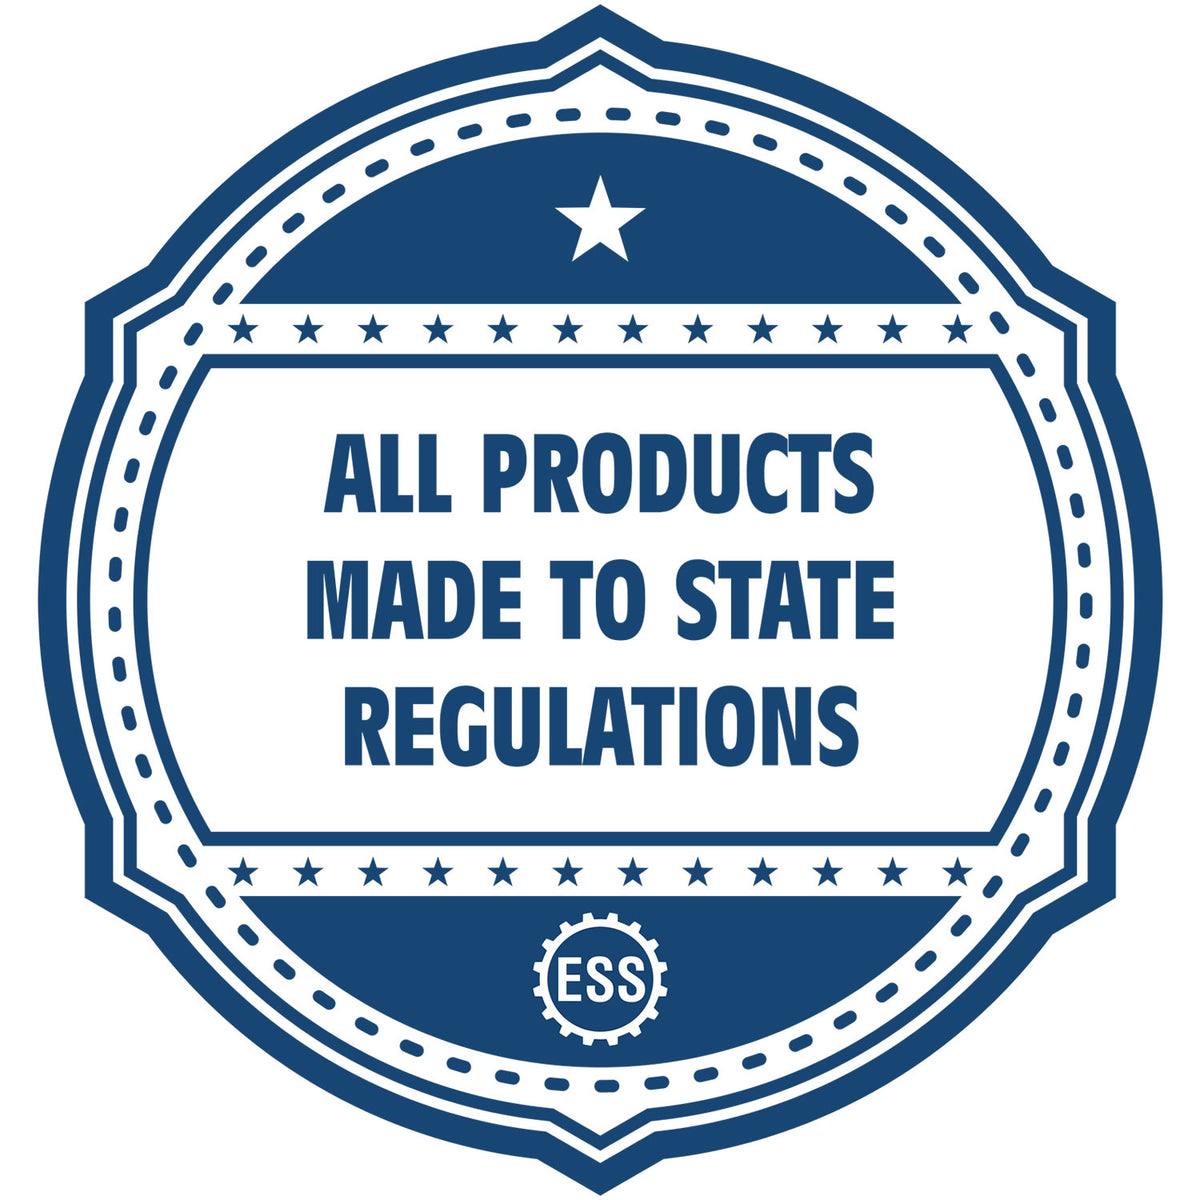 A blue icon or badge for the Hybrid Maine Geologist Seal showing that this product is made in compliance with state regulations.